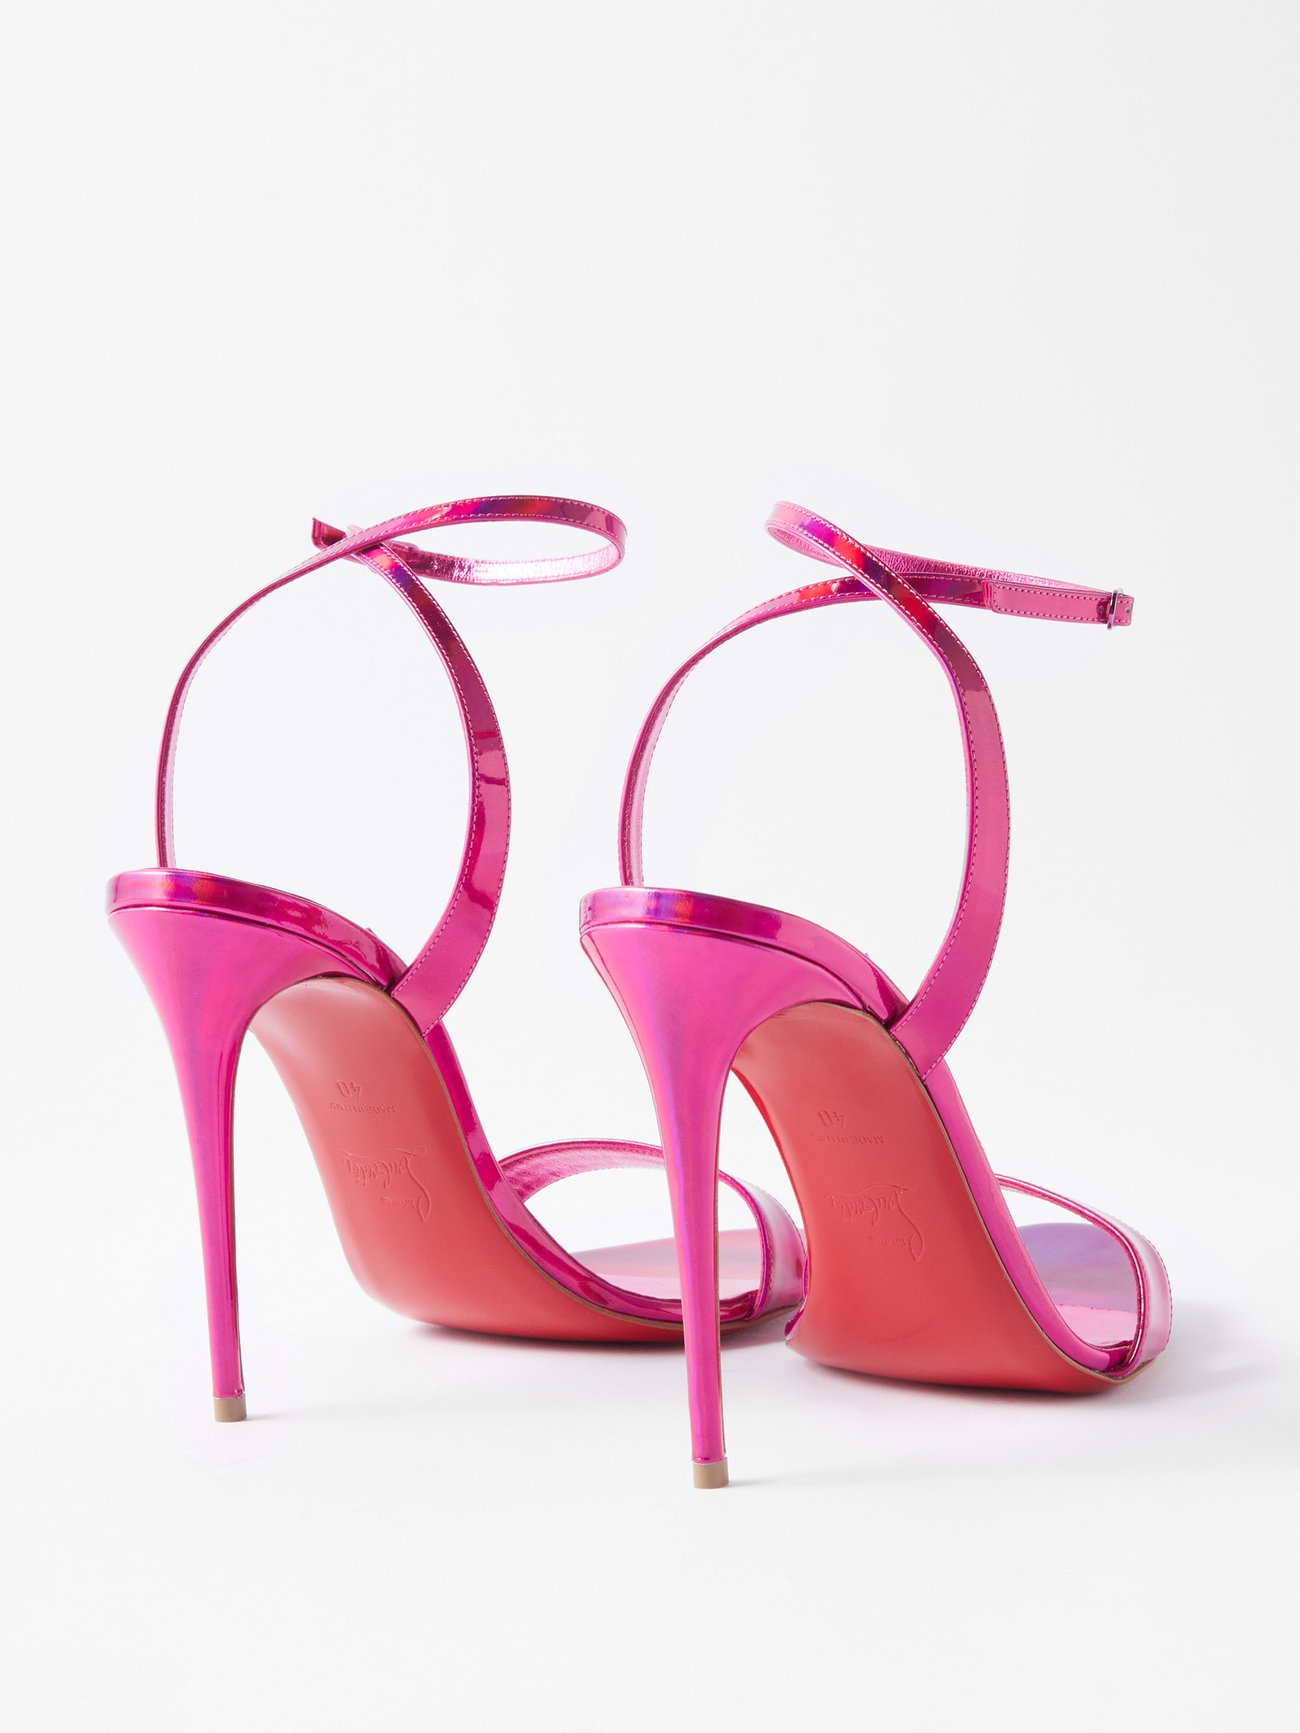 Loubigirl 100 Patent Leather Sandals in Pink - Christian Louboutin